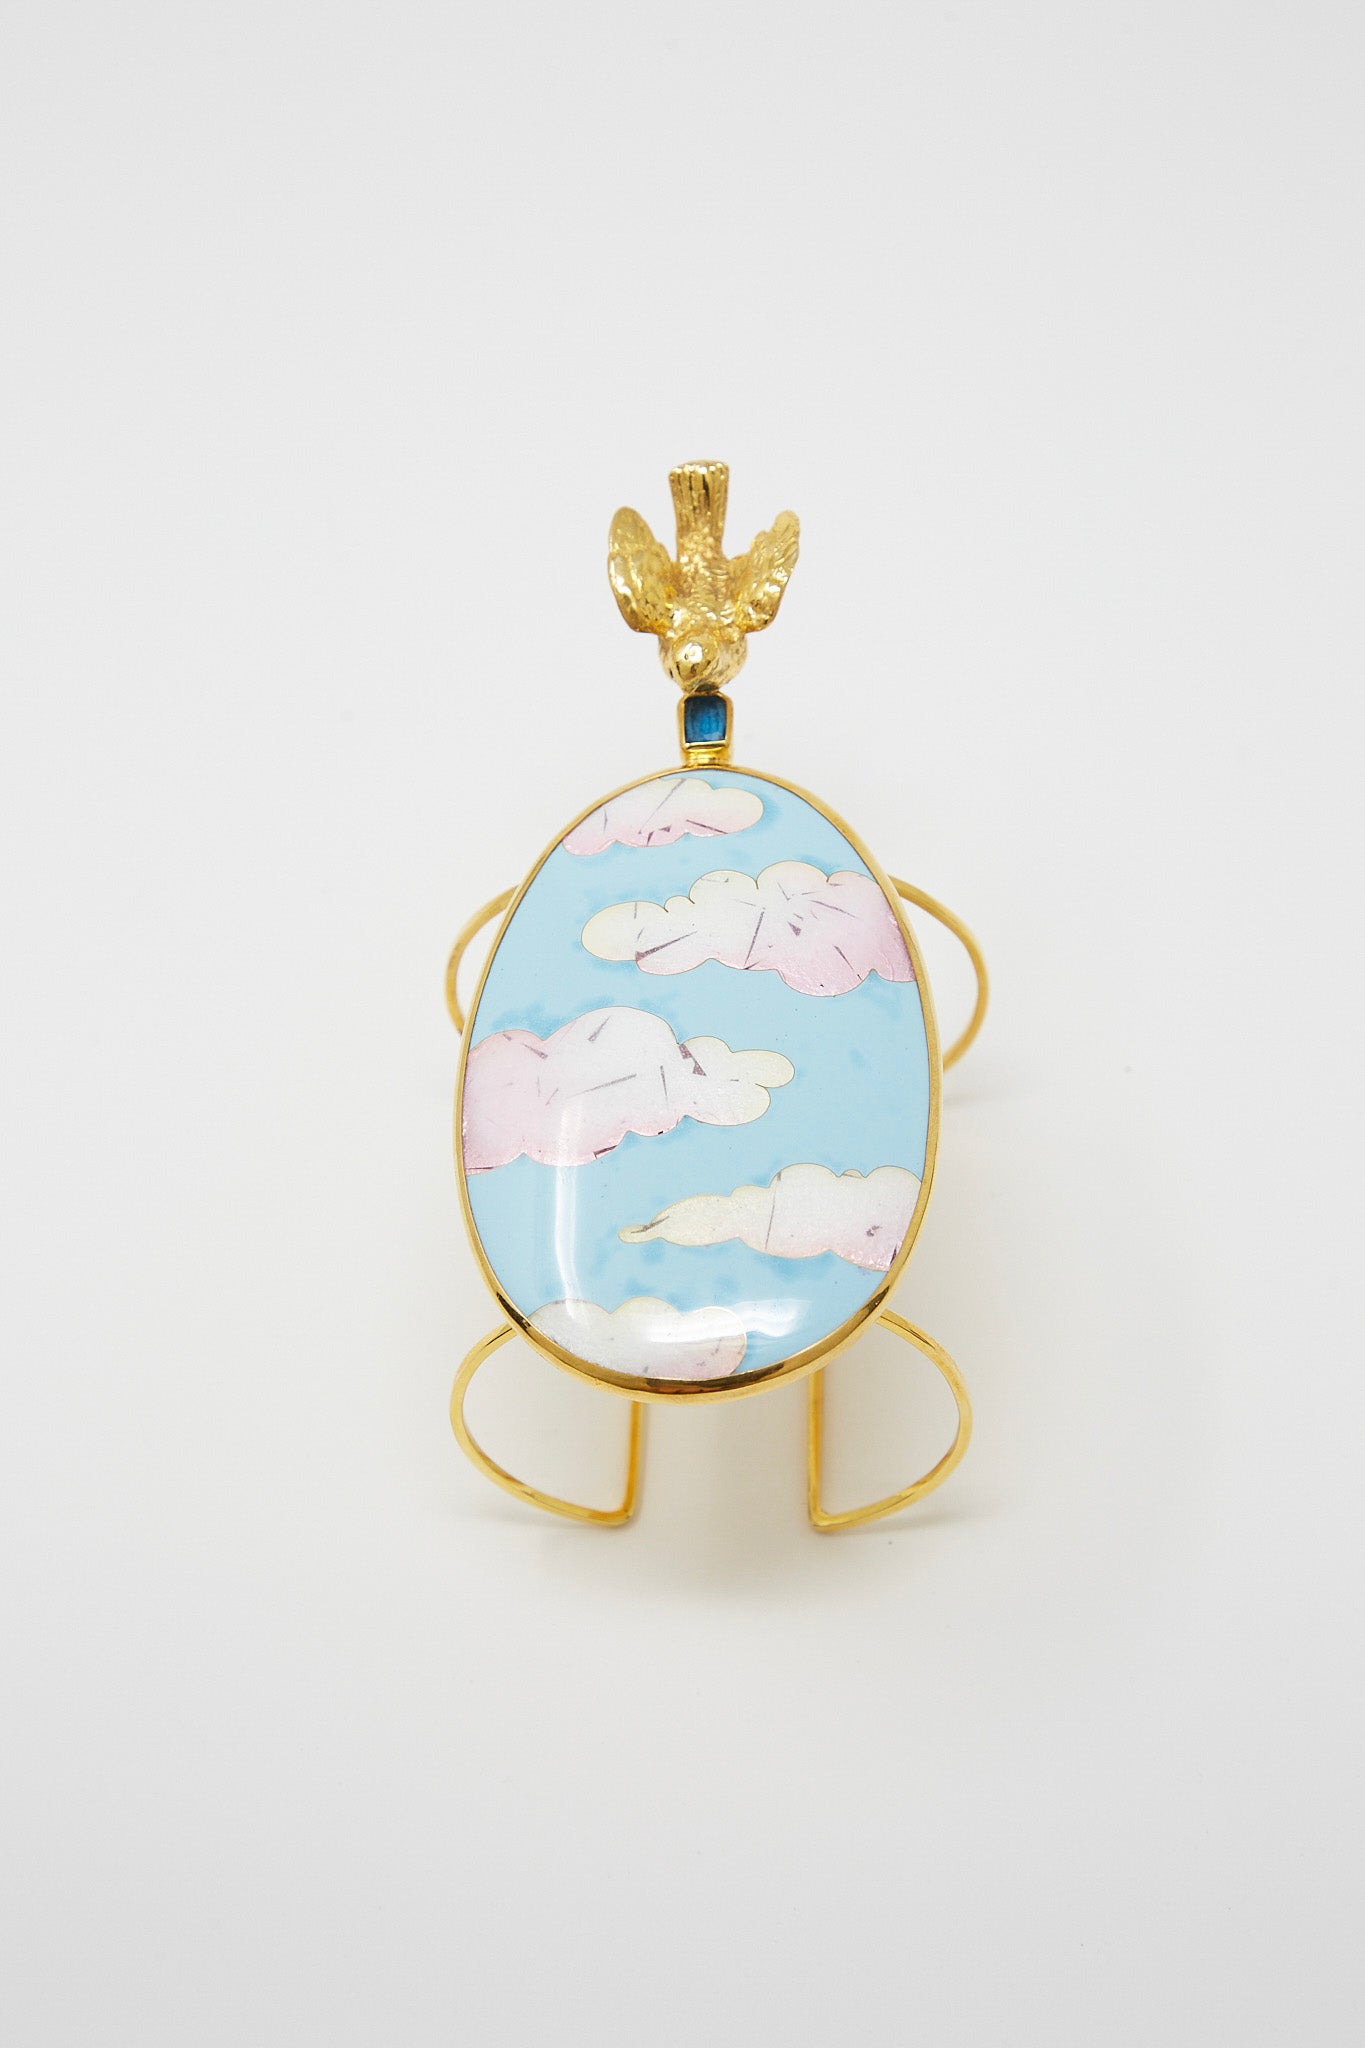 A Sofio Gongli Bracelet in Clouds with Bird.